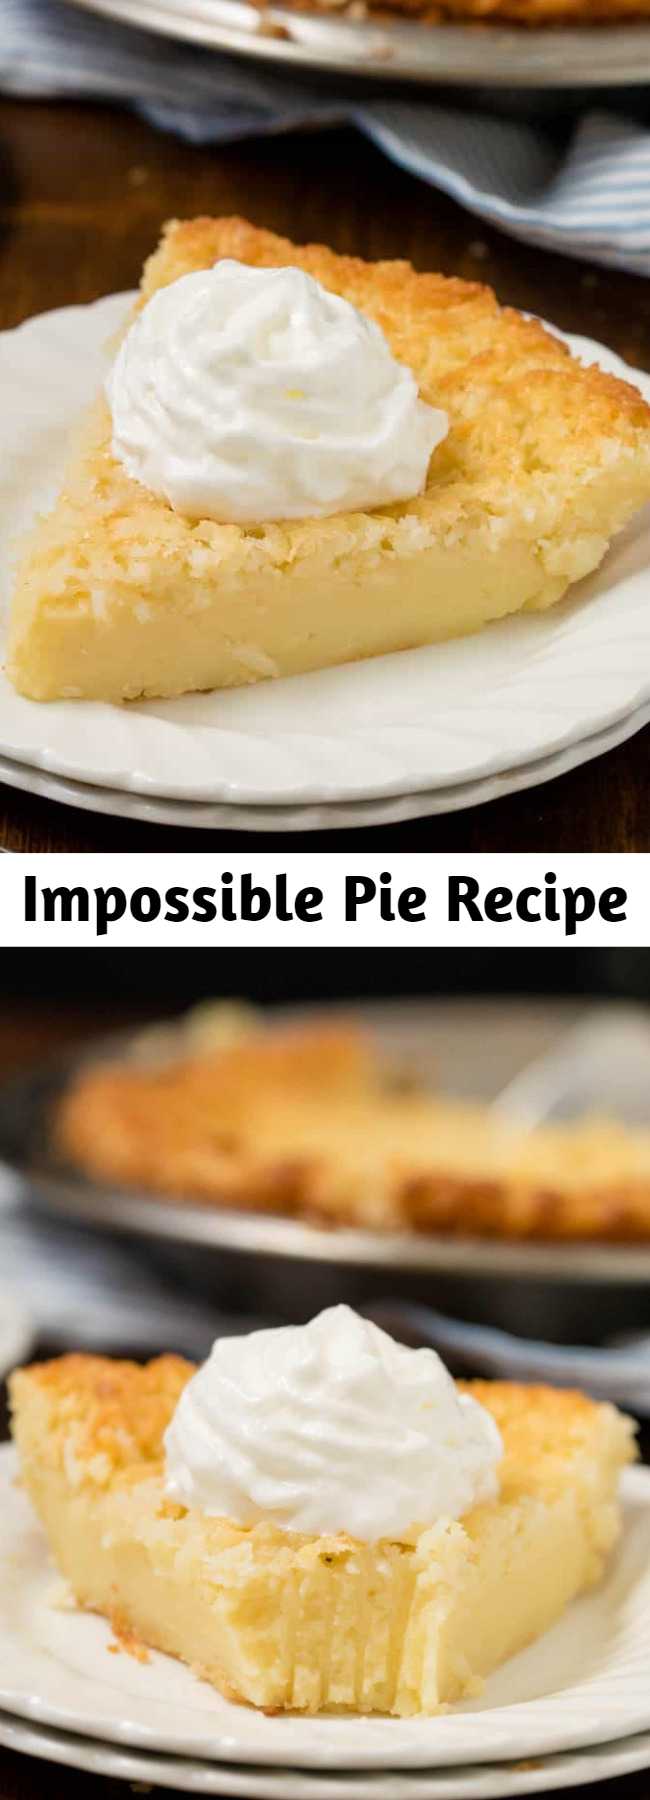 Impossible Pie Recipe - The easiest pie you will ever bake! It magically forms its own crust plus two delicious layers while baking. This vintage pie has been around for a long time and I can see why. It’s easy to make and is scrumptious to eat! Why is it called Impossible Pie? I think it has something to do with the fact that it bakes it’s own crust. All the ingredients are dumped into the pie plate and you let your oven work it’s magic. #impossiblepie #pie #desserts